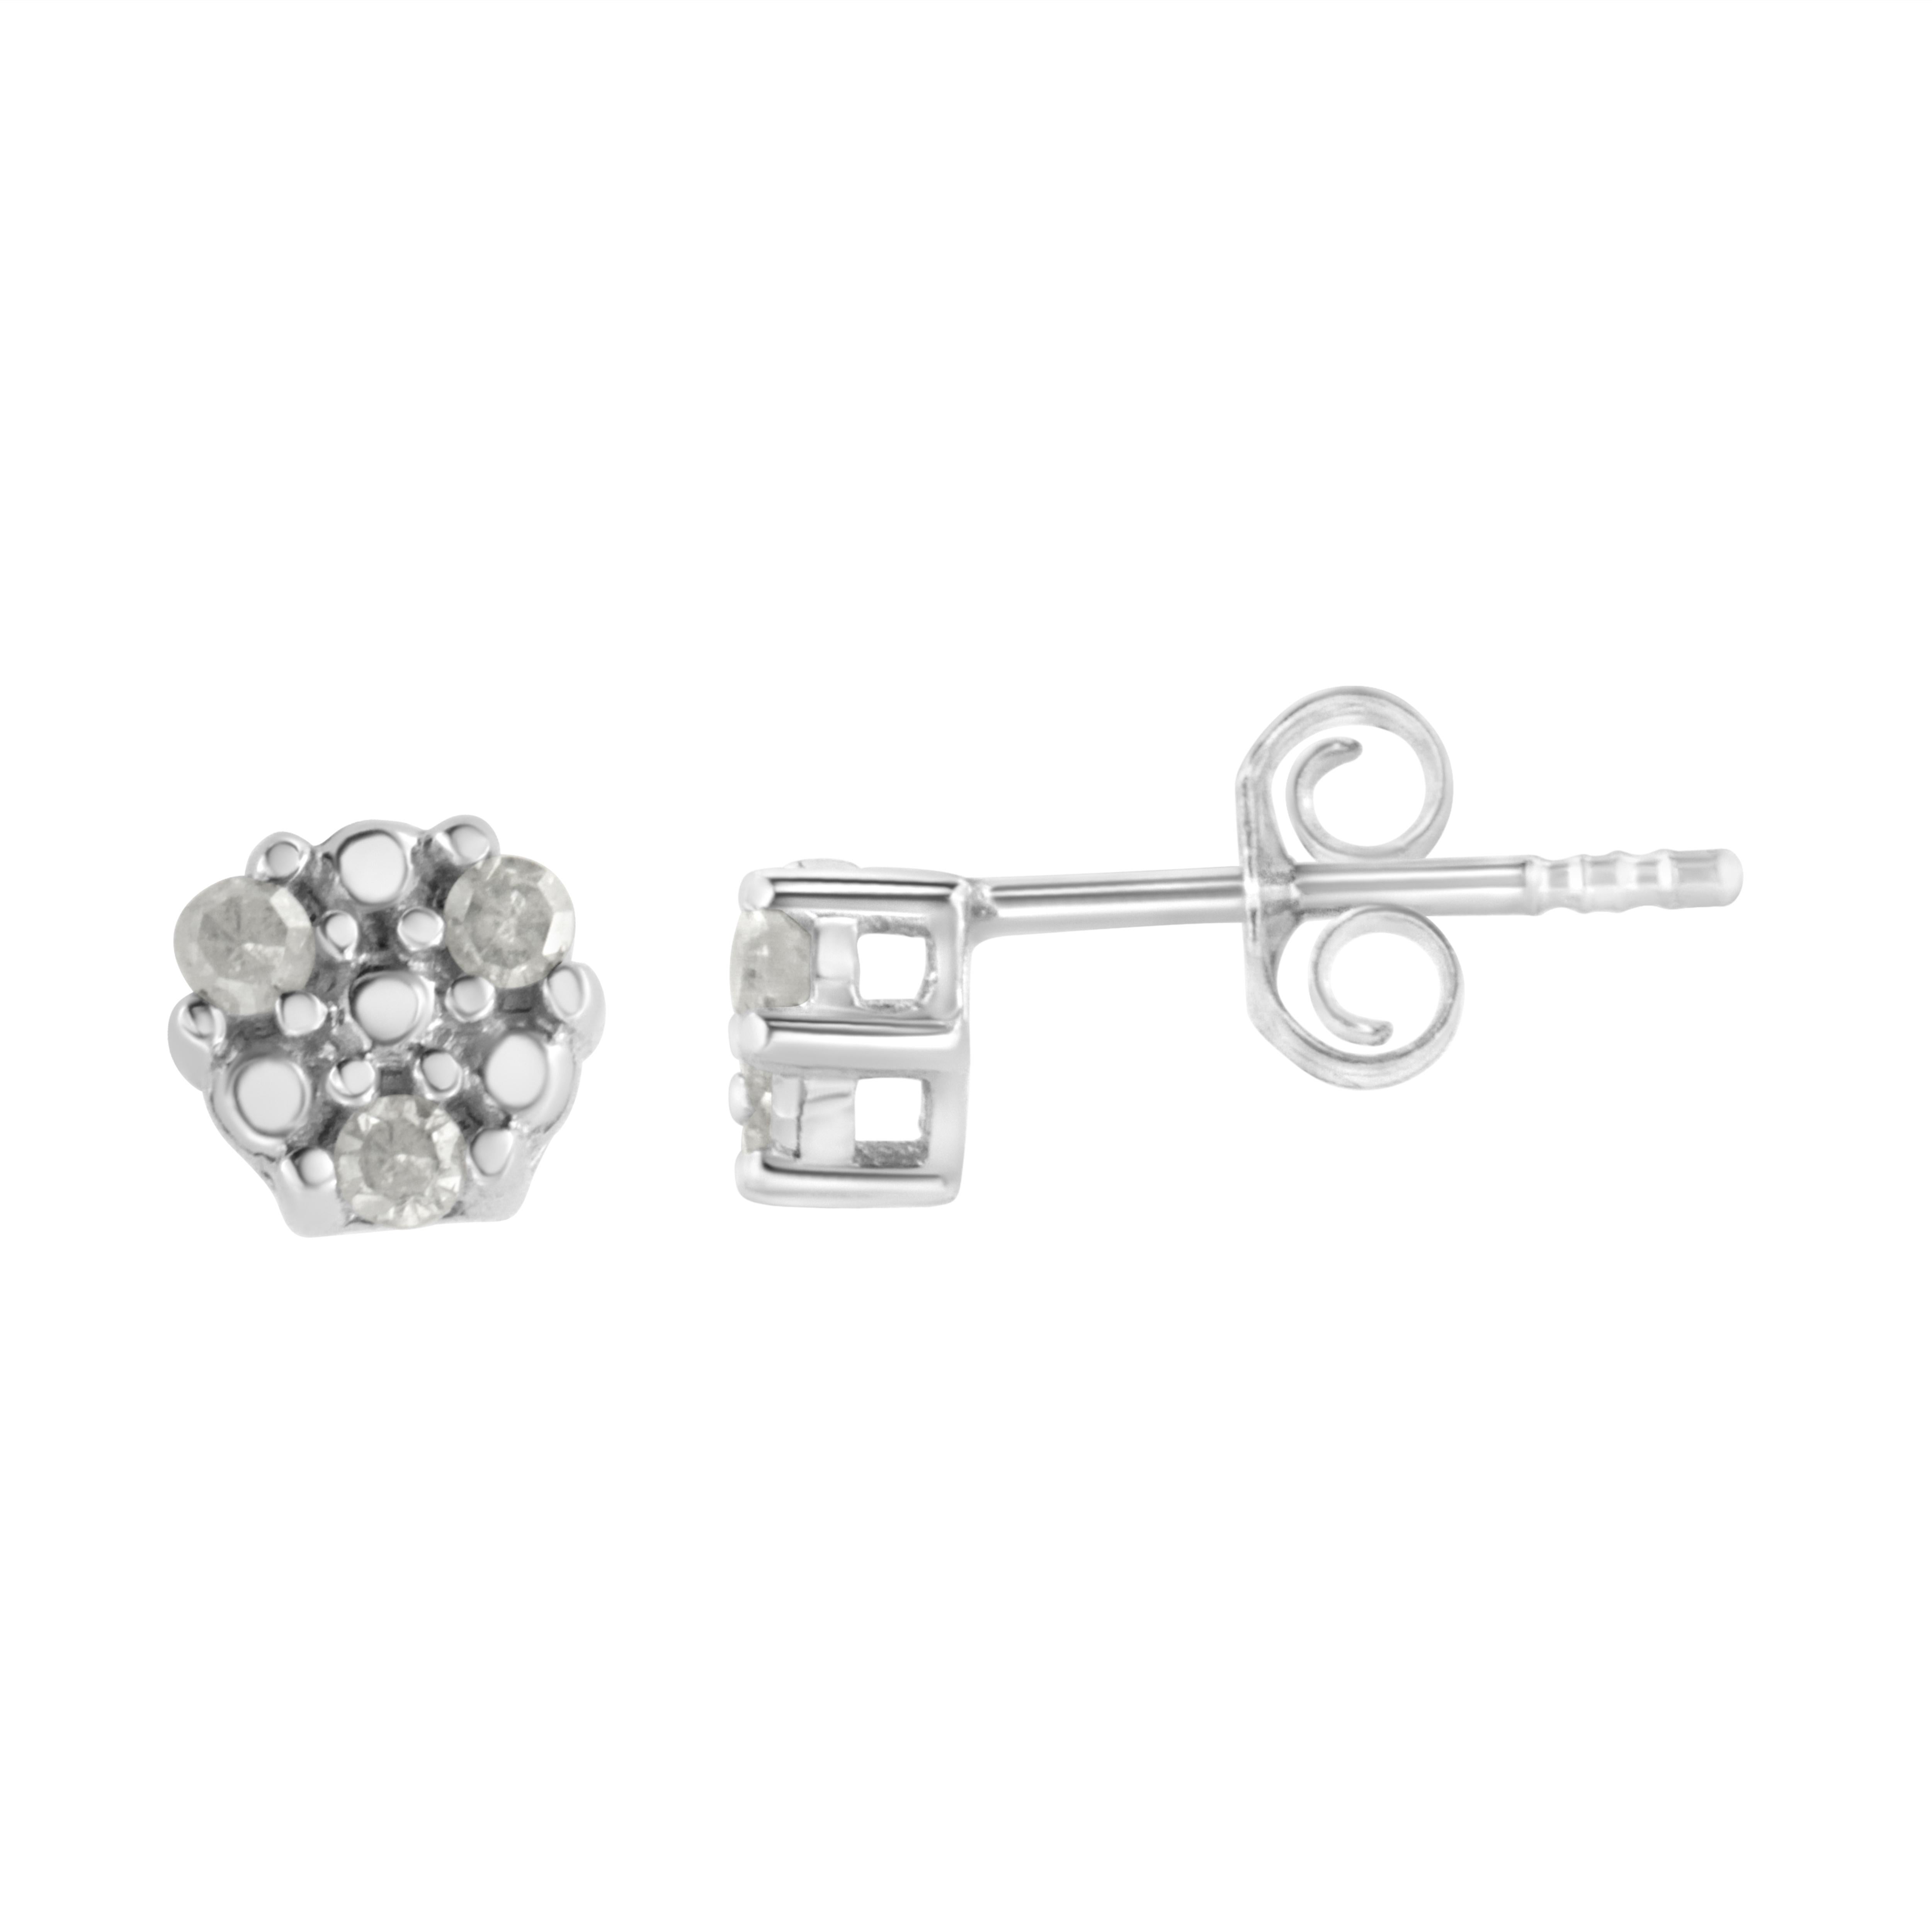 Unleash your inner radiance with these exquisite .925 sterling silver trio diamond stud earrings. Expertly crafted, these captivating earrings feature six natural round-cut diamonds, each boasting a total weight of 1/10 carat. The diamonds, with